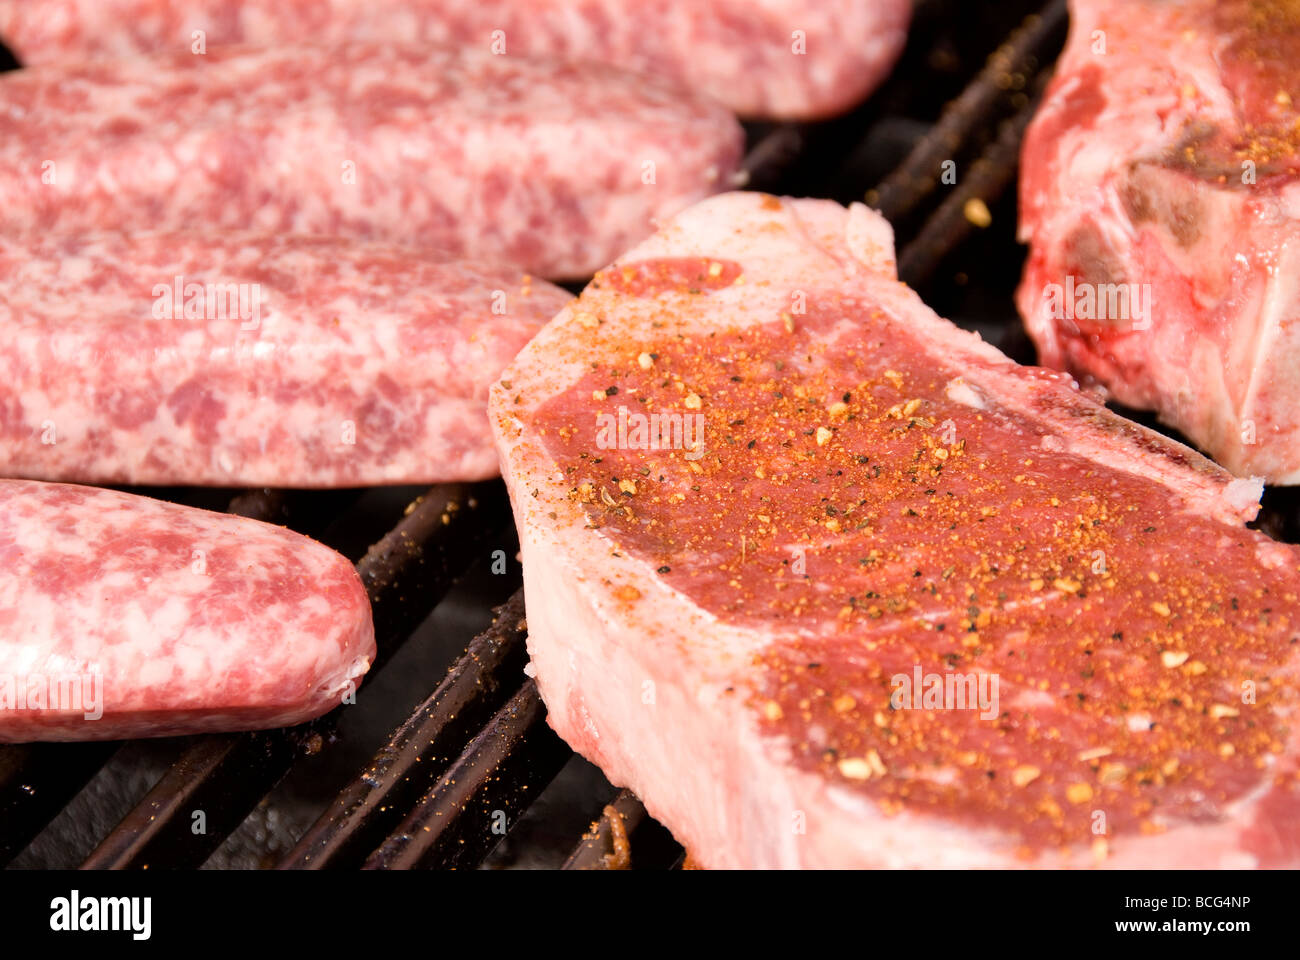 Raw steaks and bratwurst on a barbecue grill ready to be cooked Stock Photo